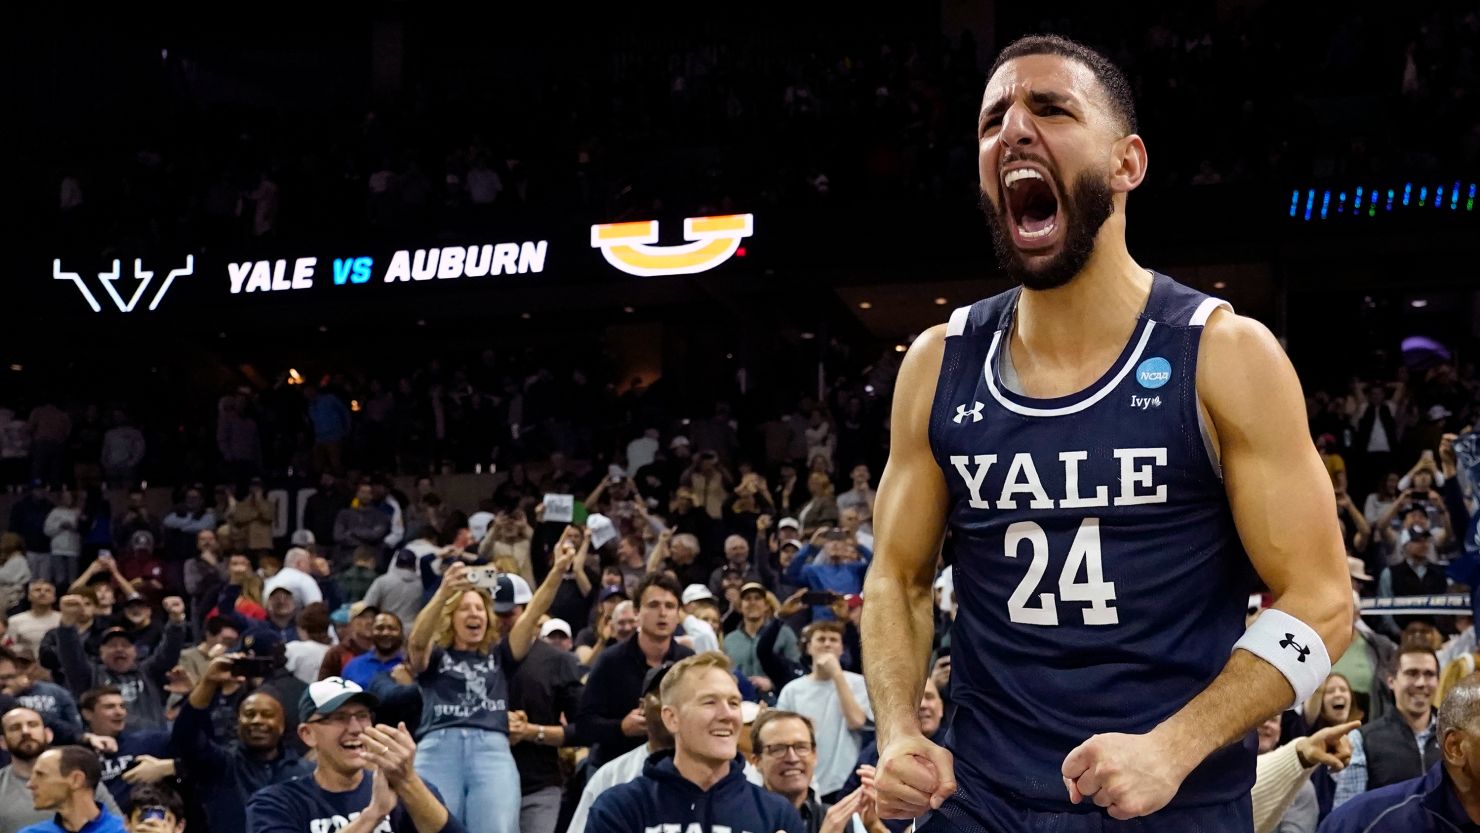 Yassine Gharram celebrates Yale's upset victory over Auburn in the first round of March Madness.